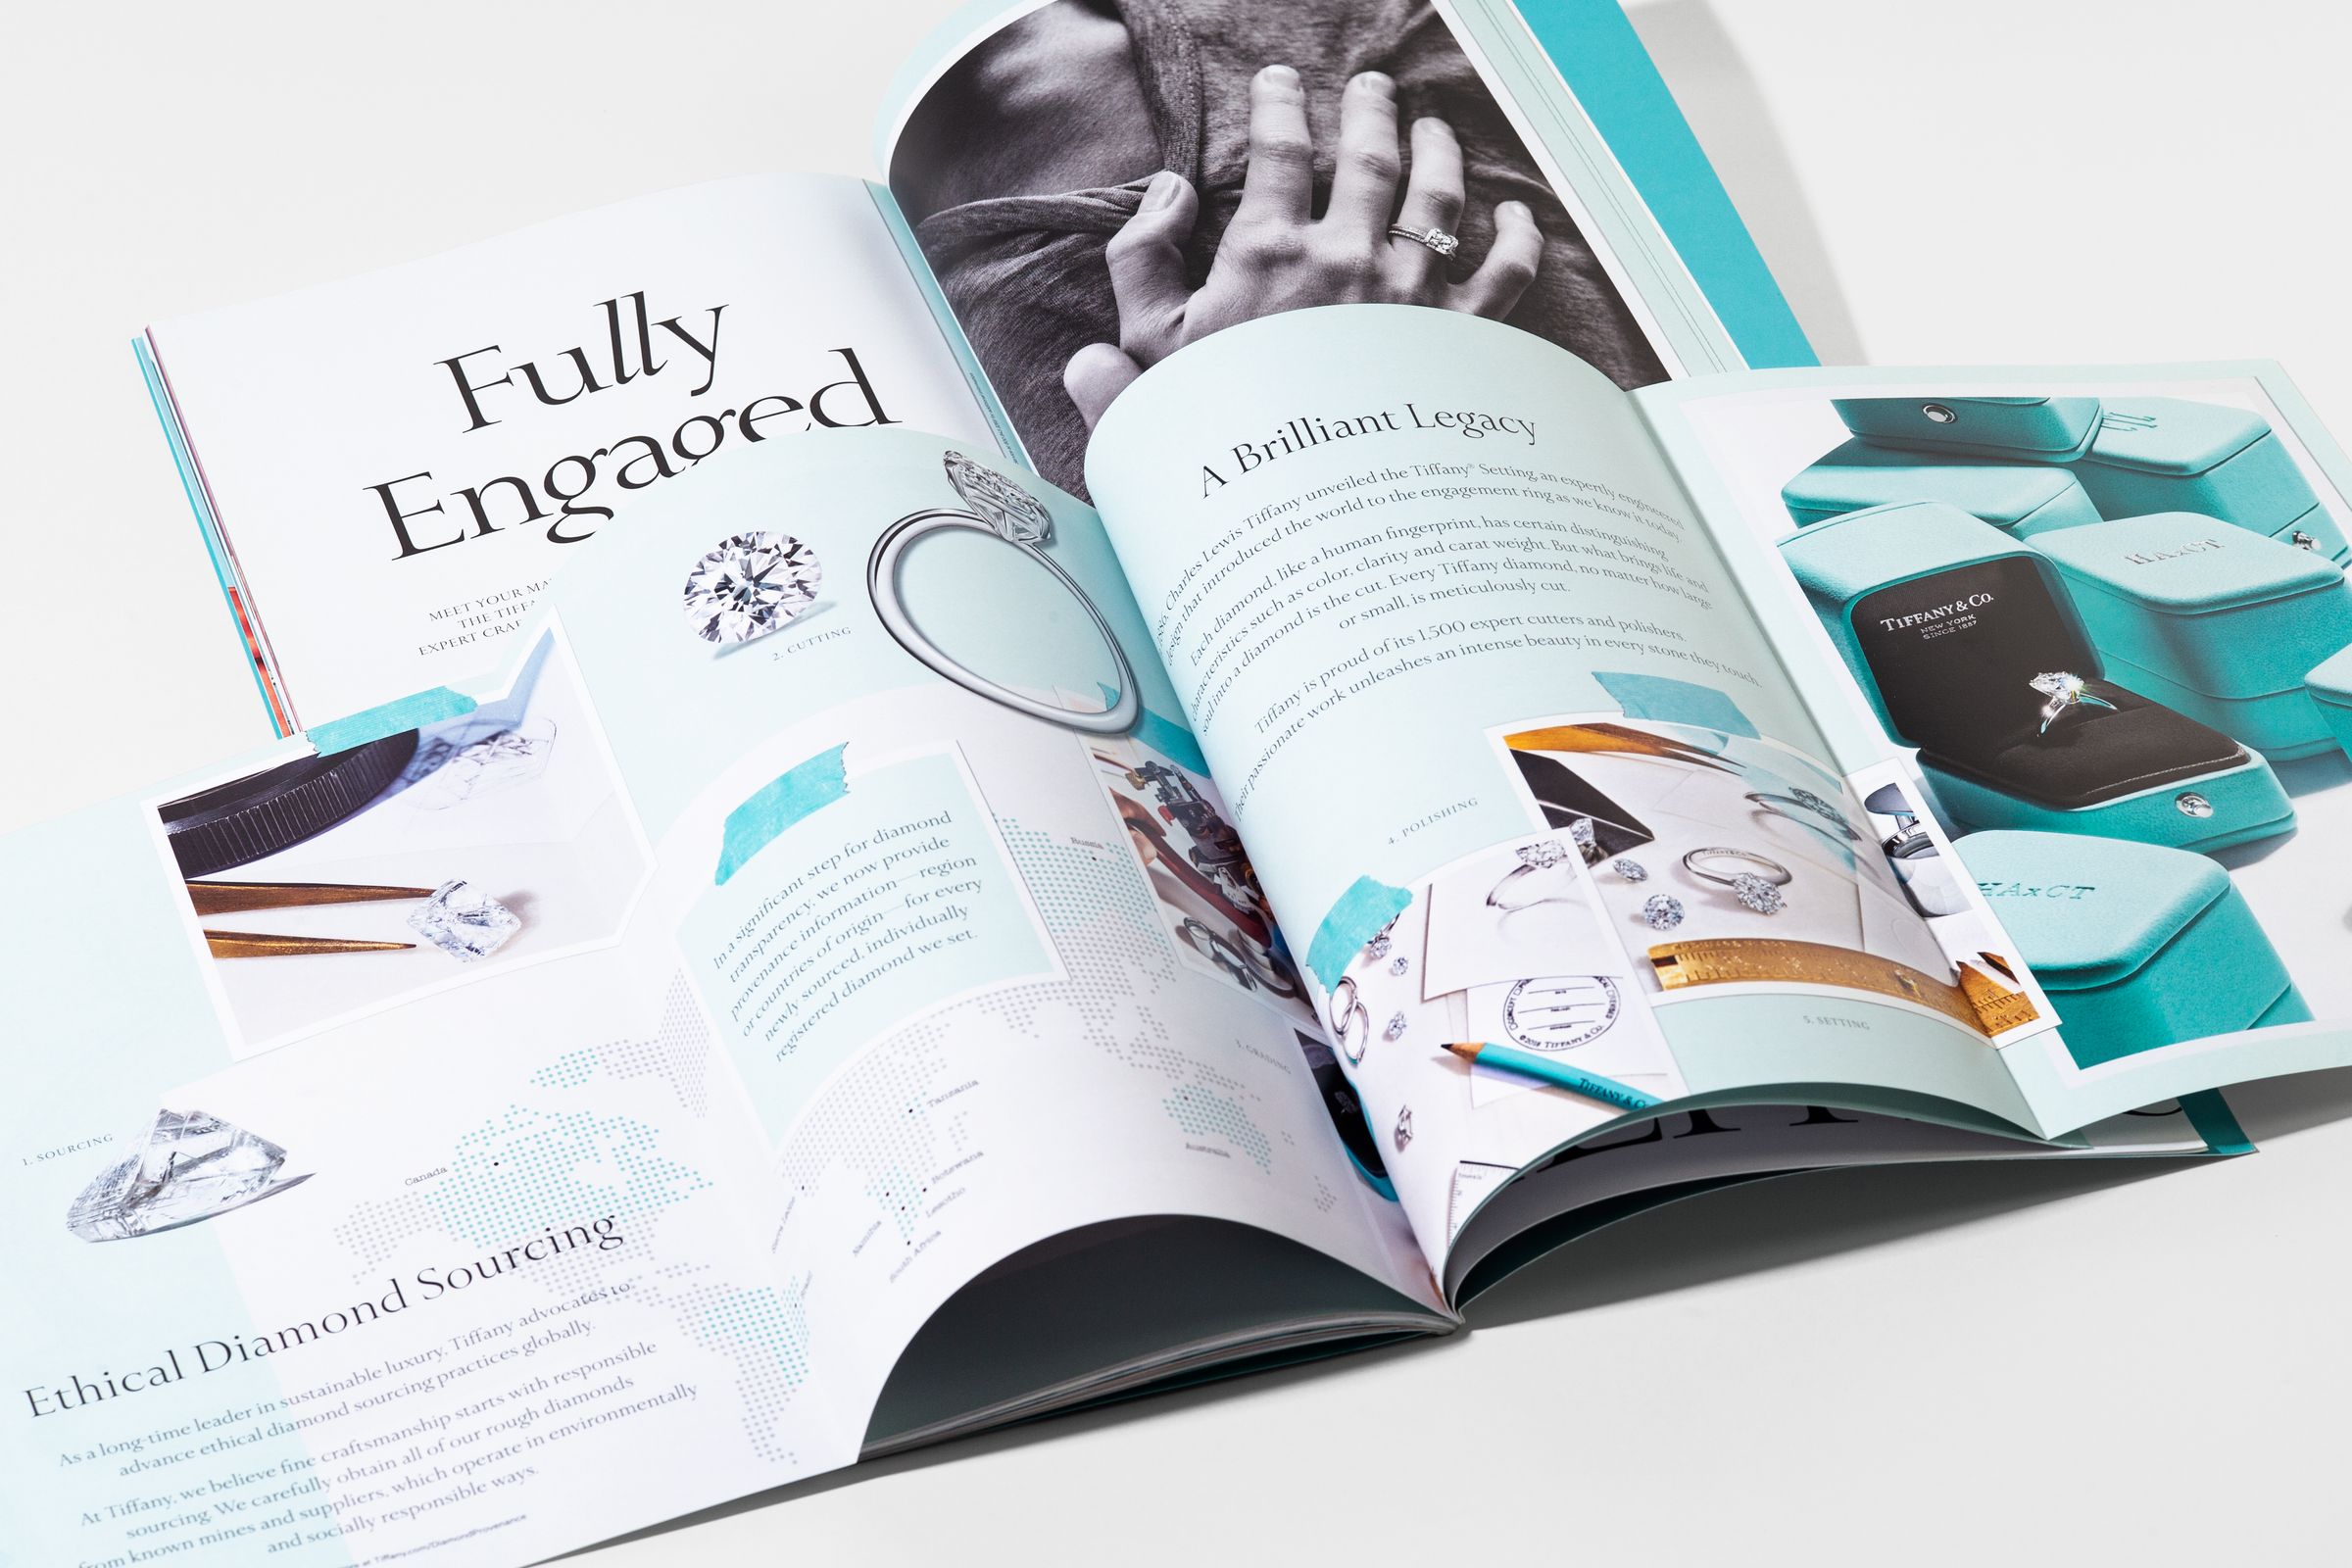 This is Tiffany magazine issue 9 engagement story spread design